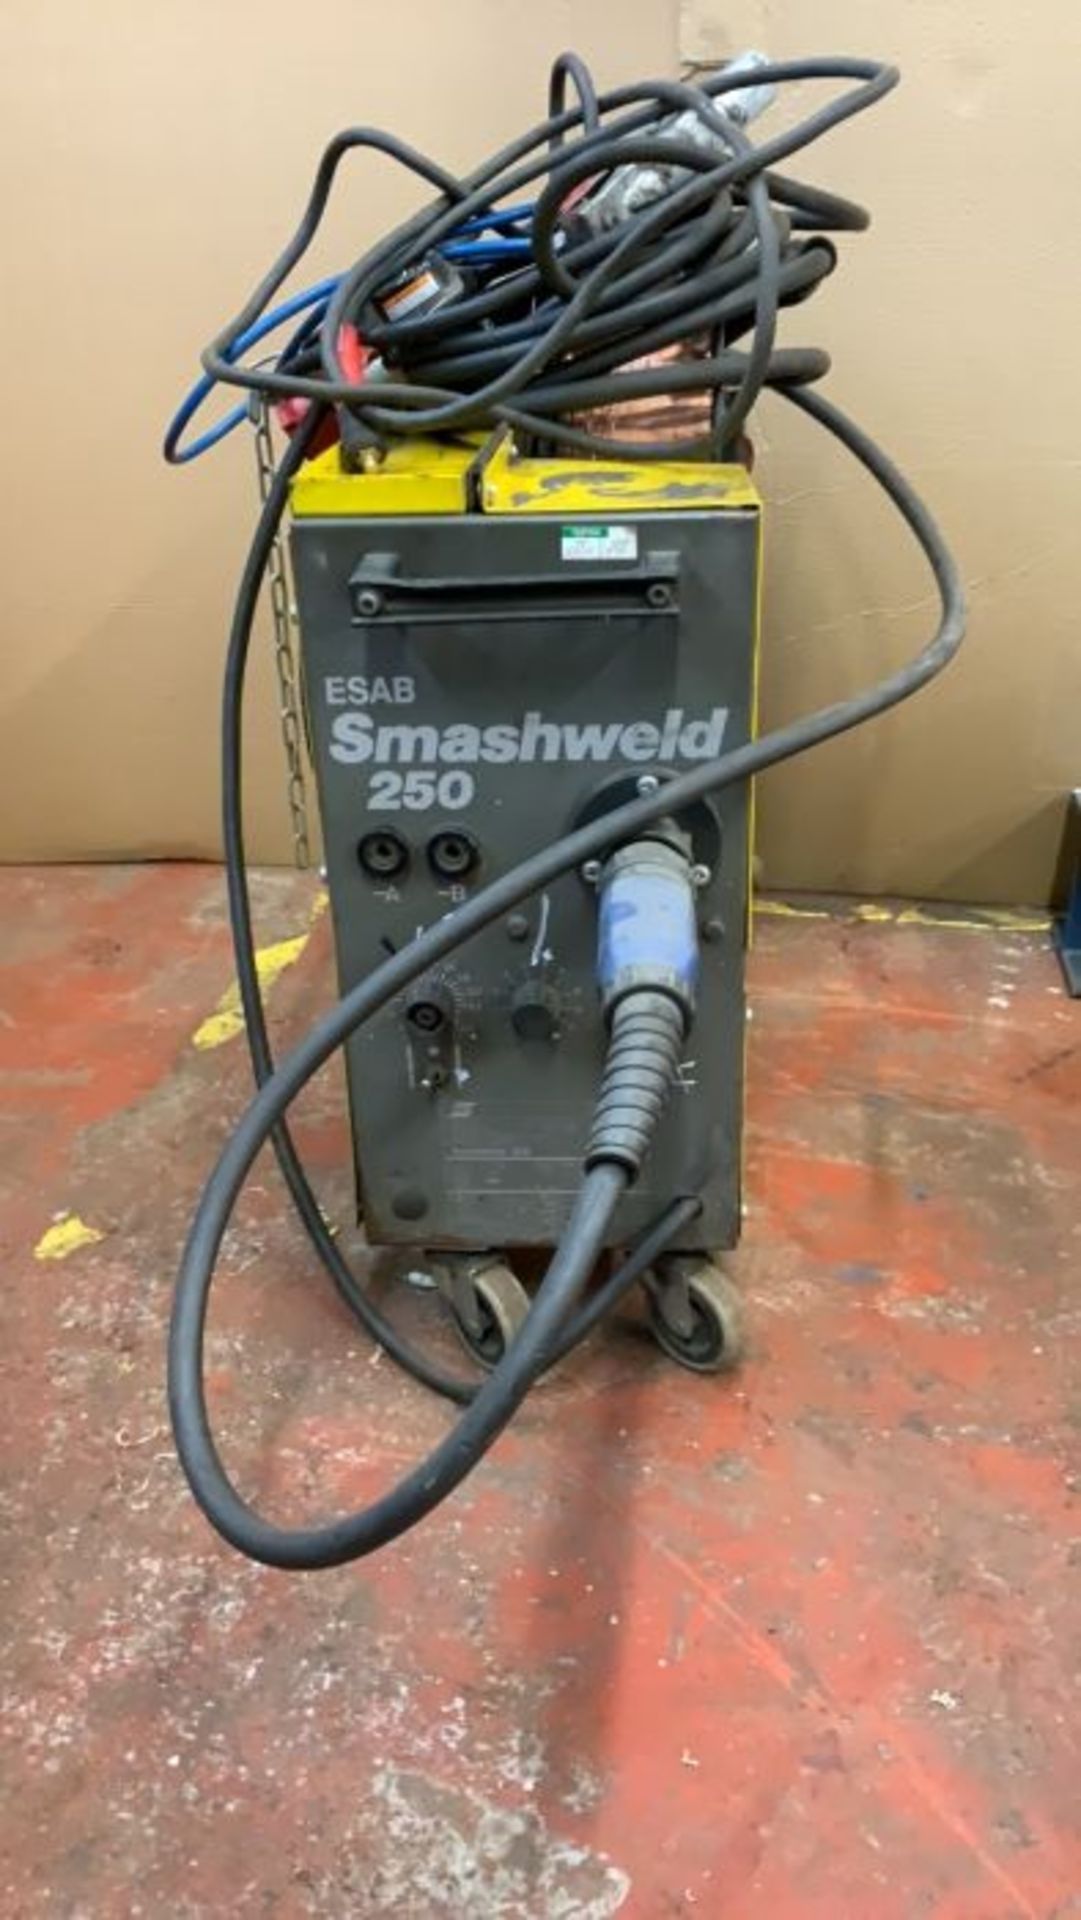 ESAB Smashweld 250, Welder, Serial No. 301-06333 with wire feed and part roll of wire